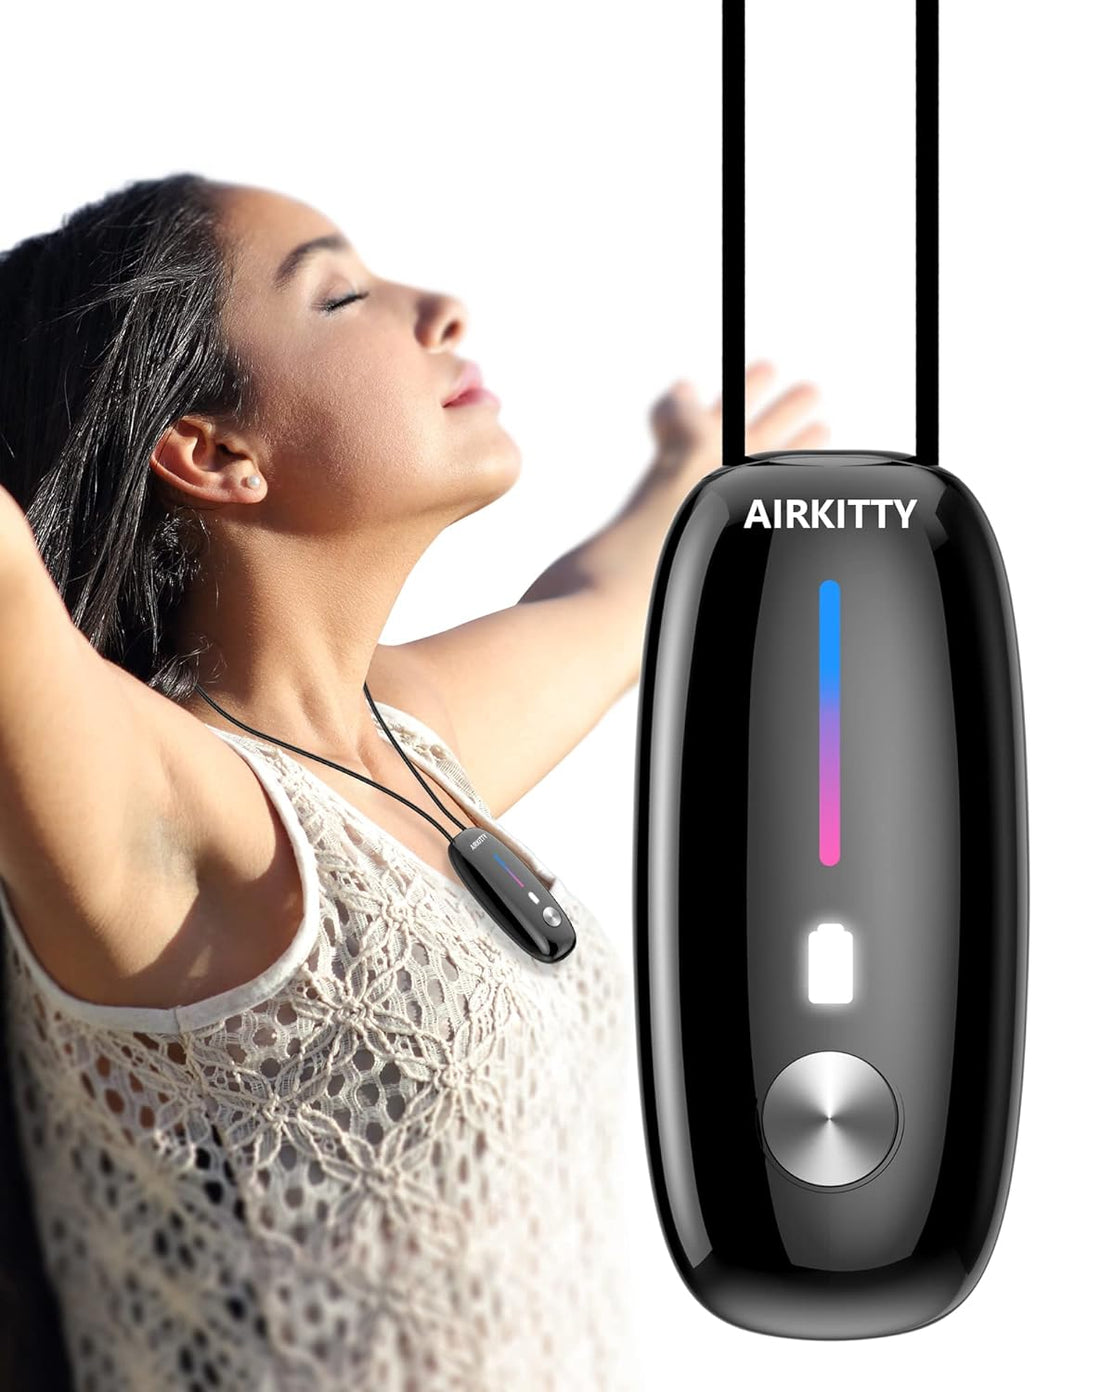 Airkitty Personal Air Purifier Necklace,Portable Mini Air Purifier,100% No Static Shock,for Flight,Office,Bedroom and Travel,Outdoor(A10S Black)